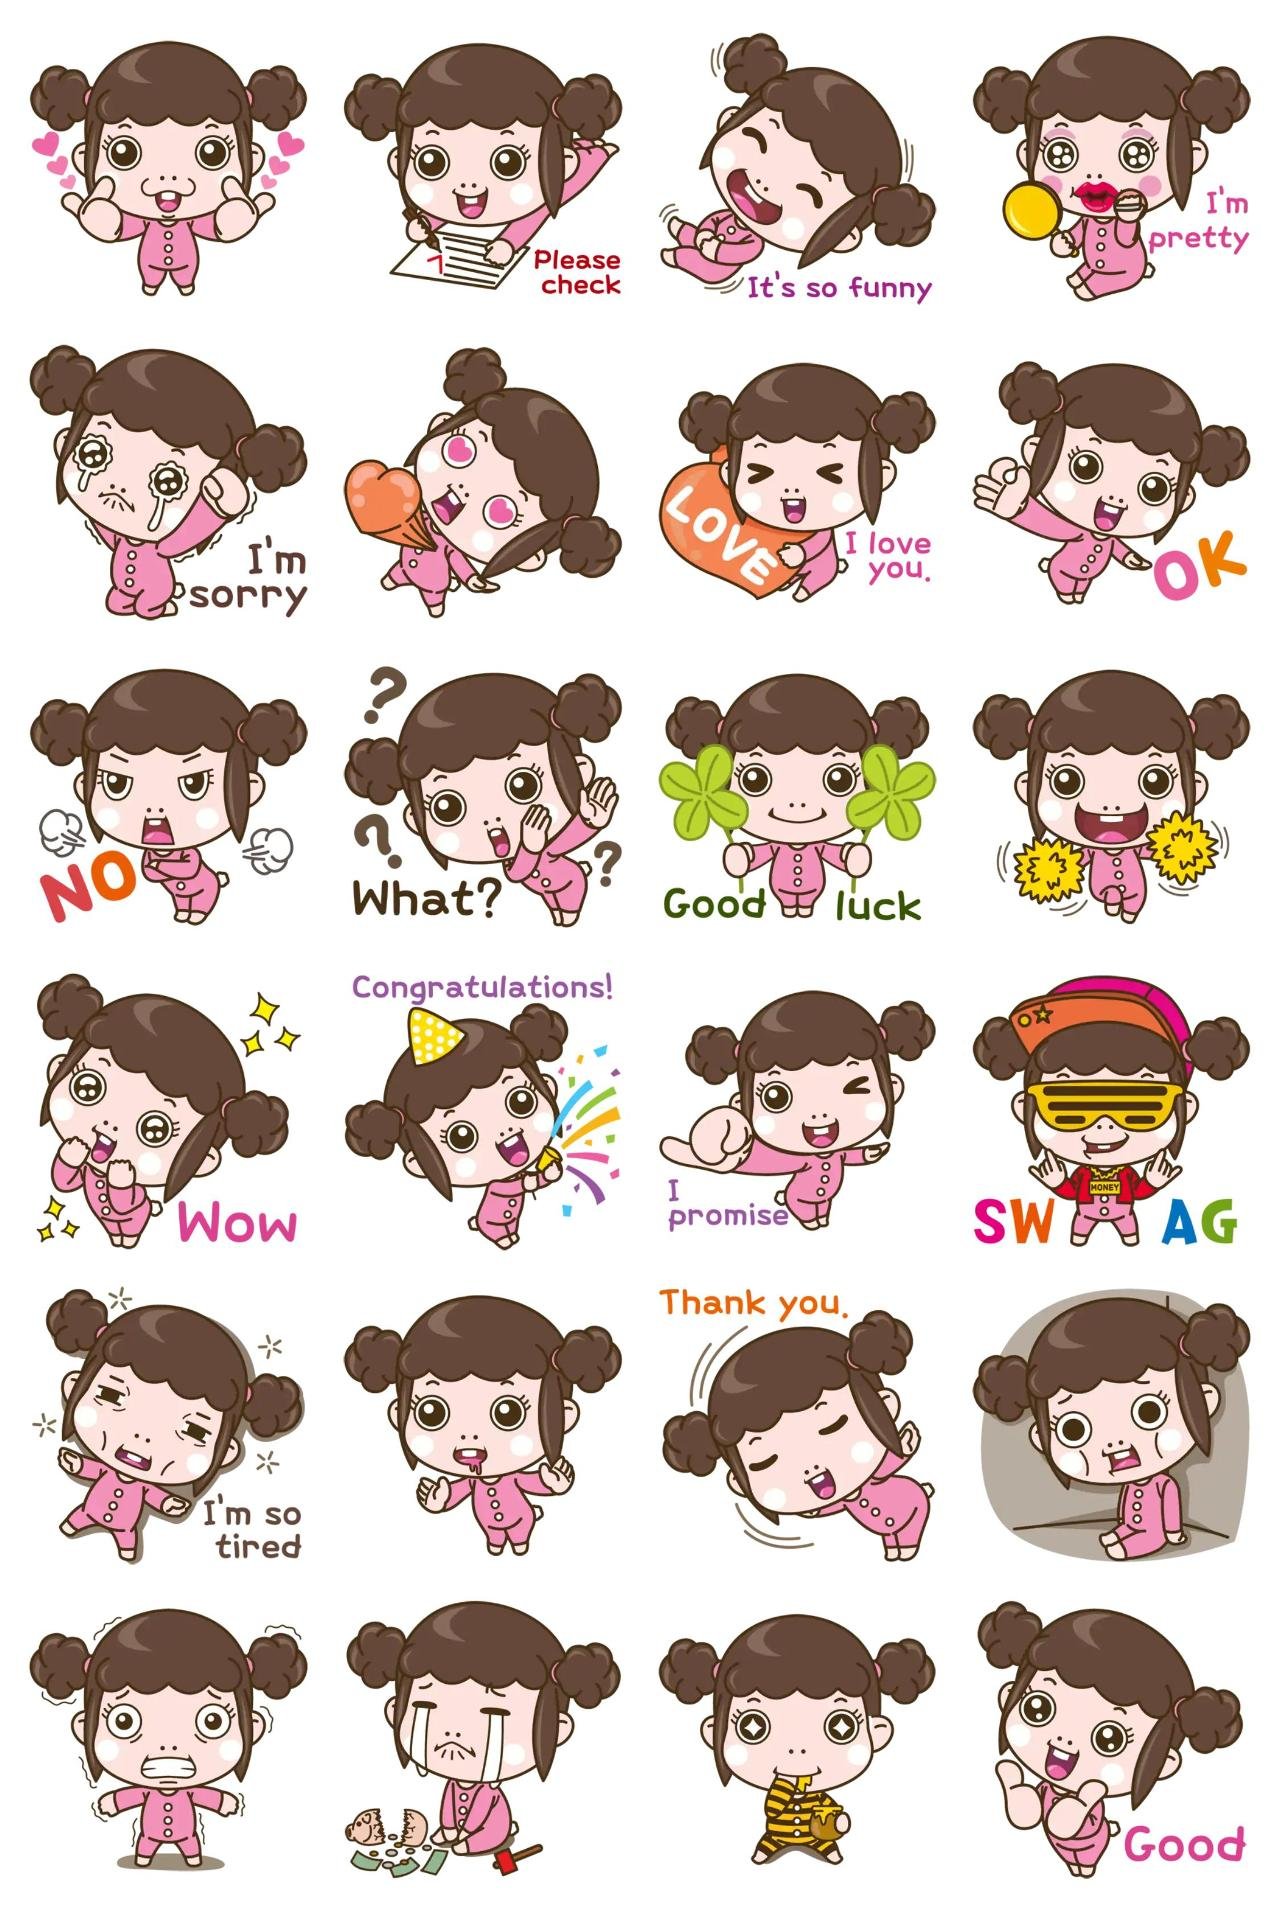 Hongsim Gag,People sticker pack for Whatsapp, Telegram, Signal, and others chatting and message apps